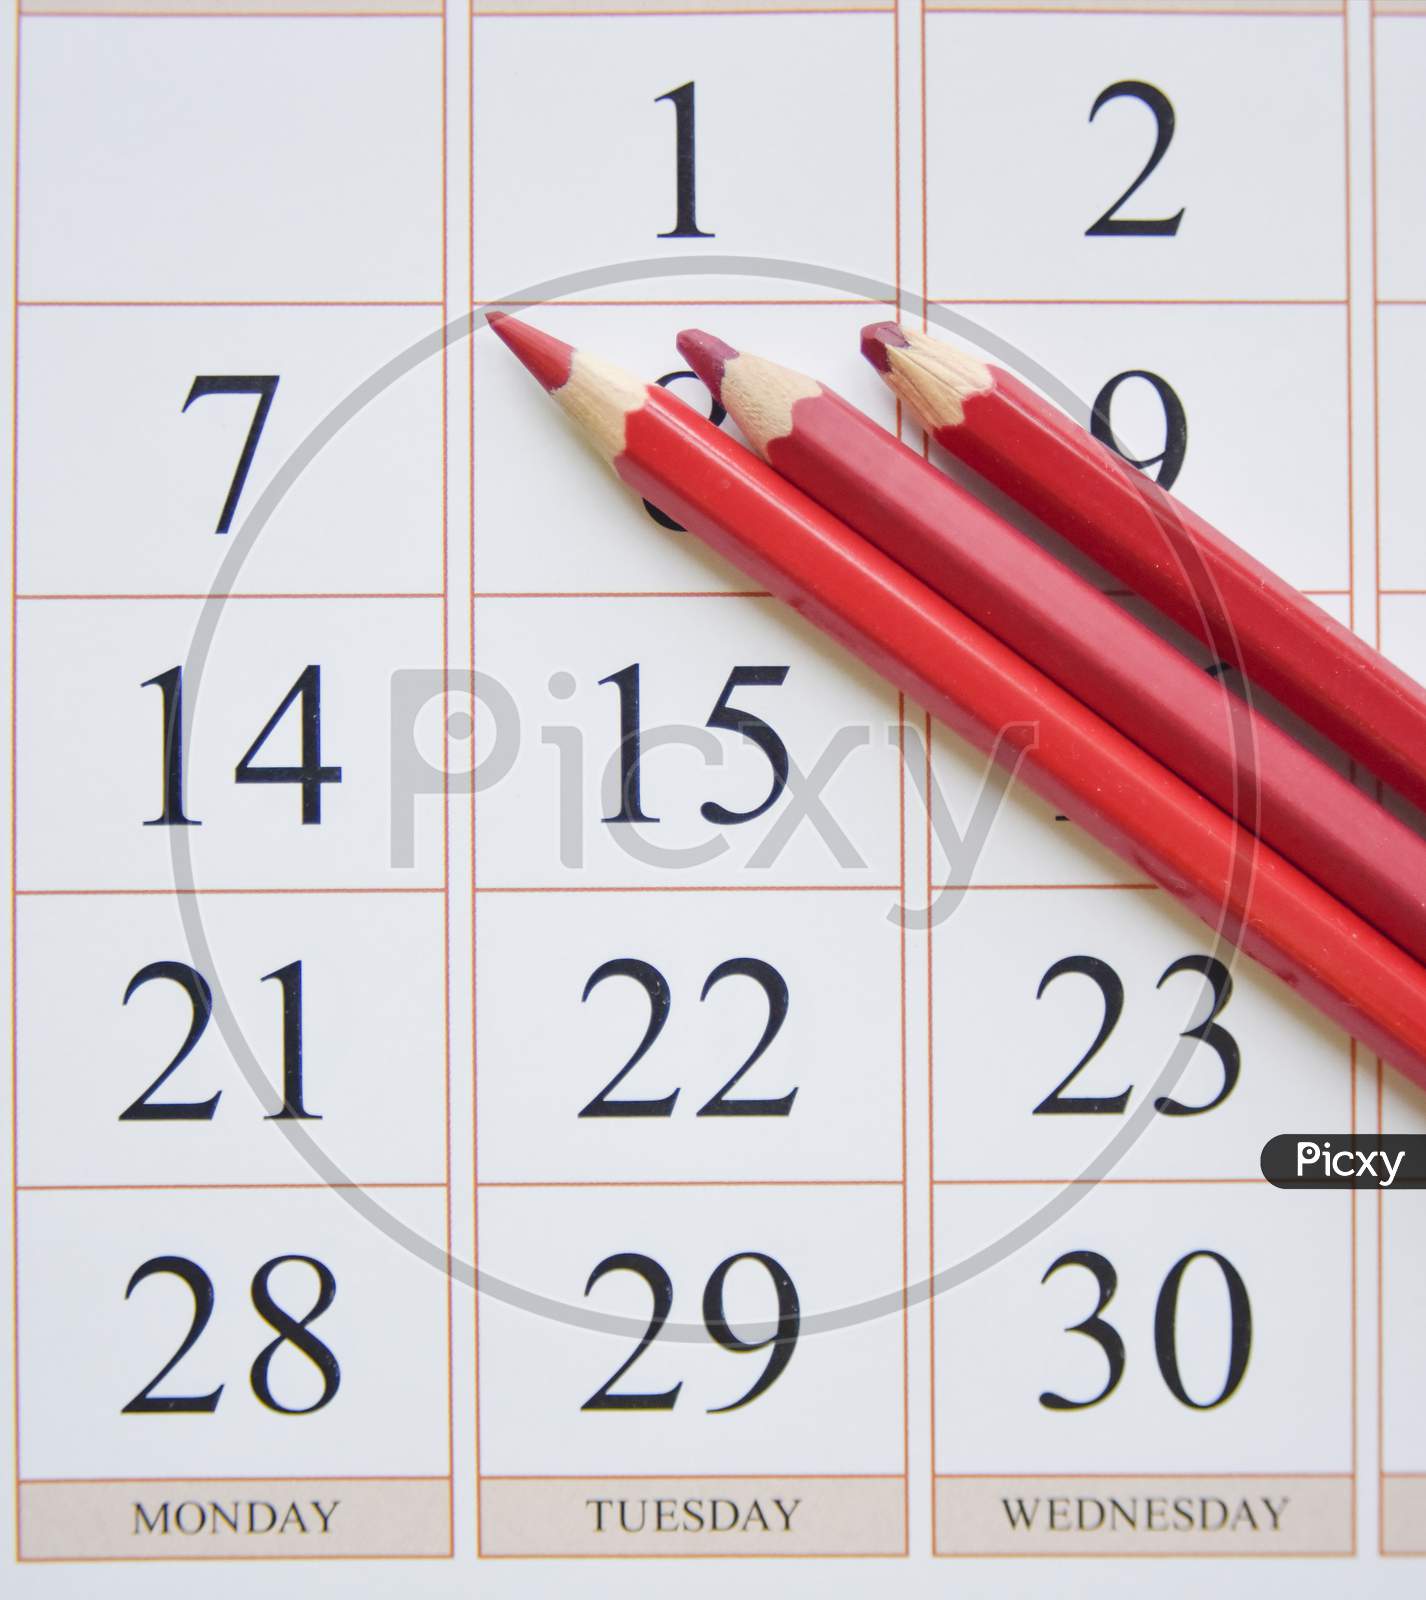 Calendar And Three Red Pencils Near The Last Date